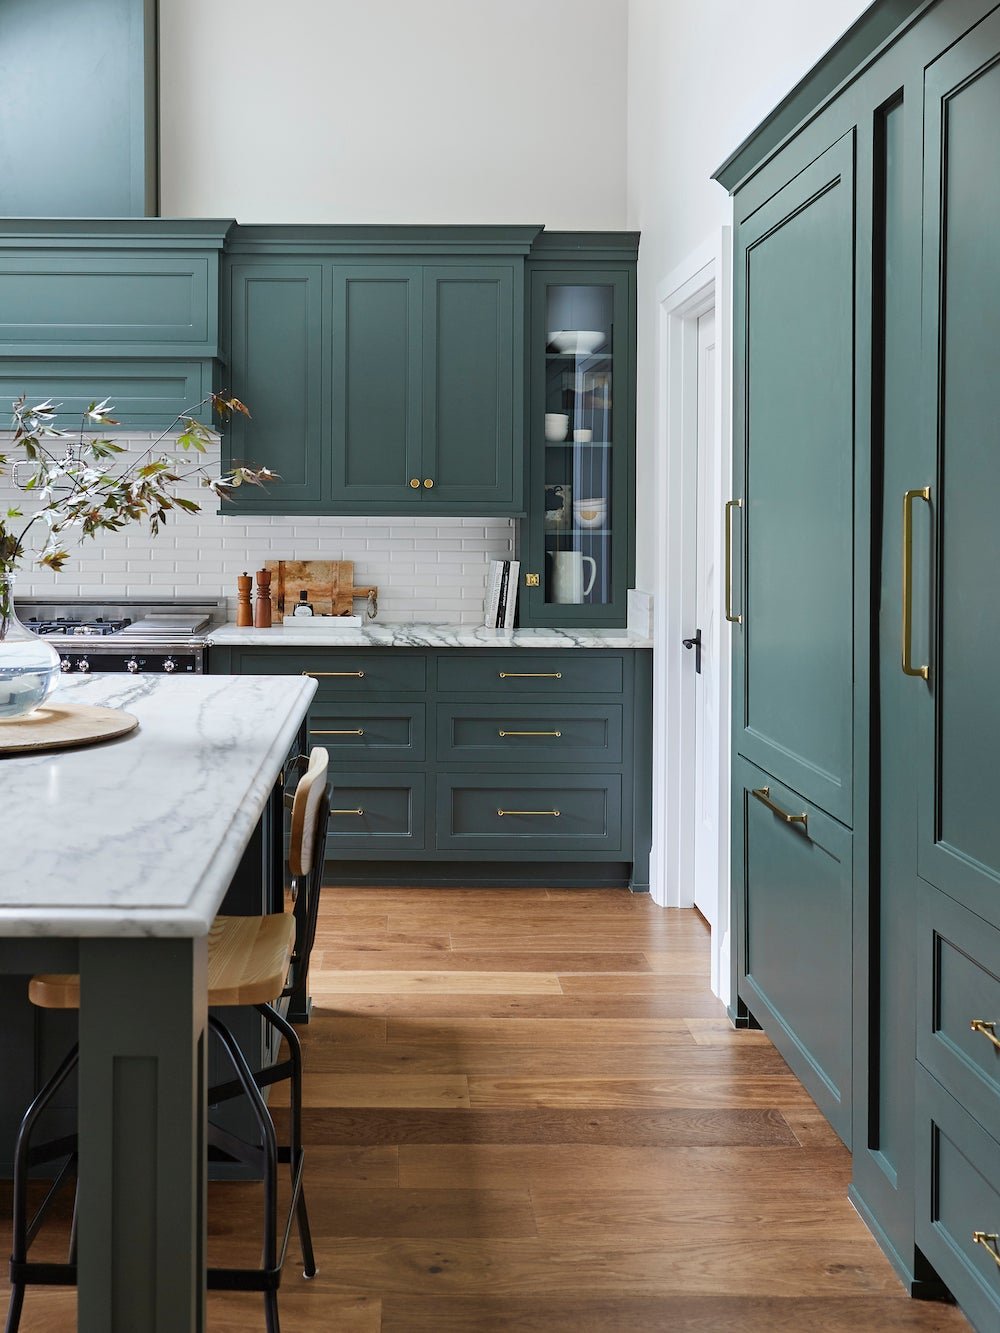 11 Kitchen Cabinet Paint Colors You Should Absolutely Be Sampling